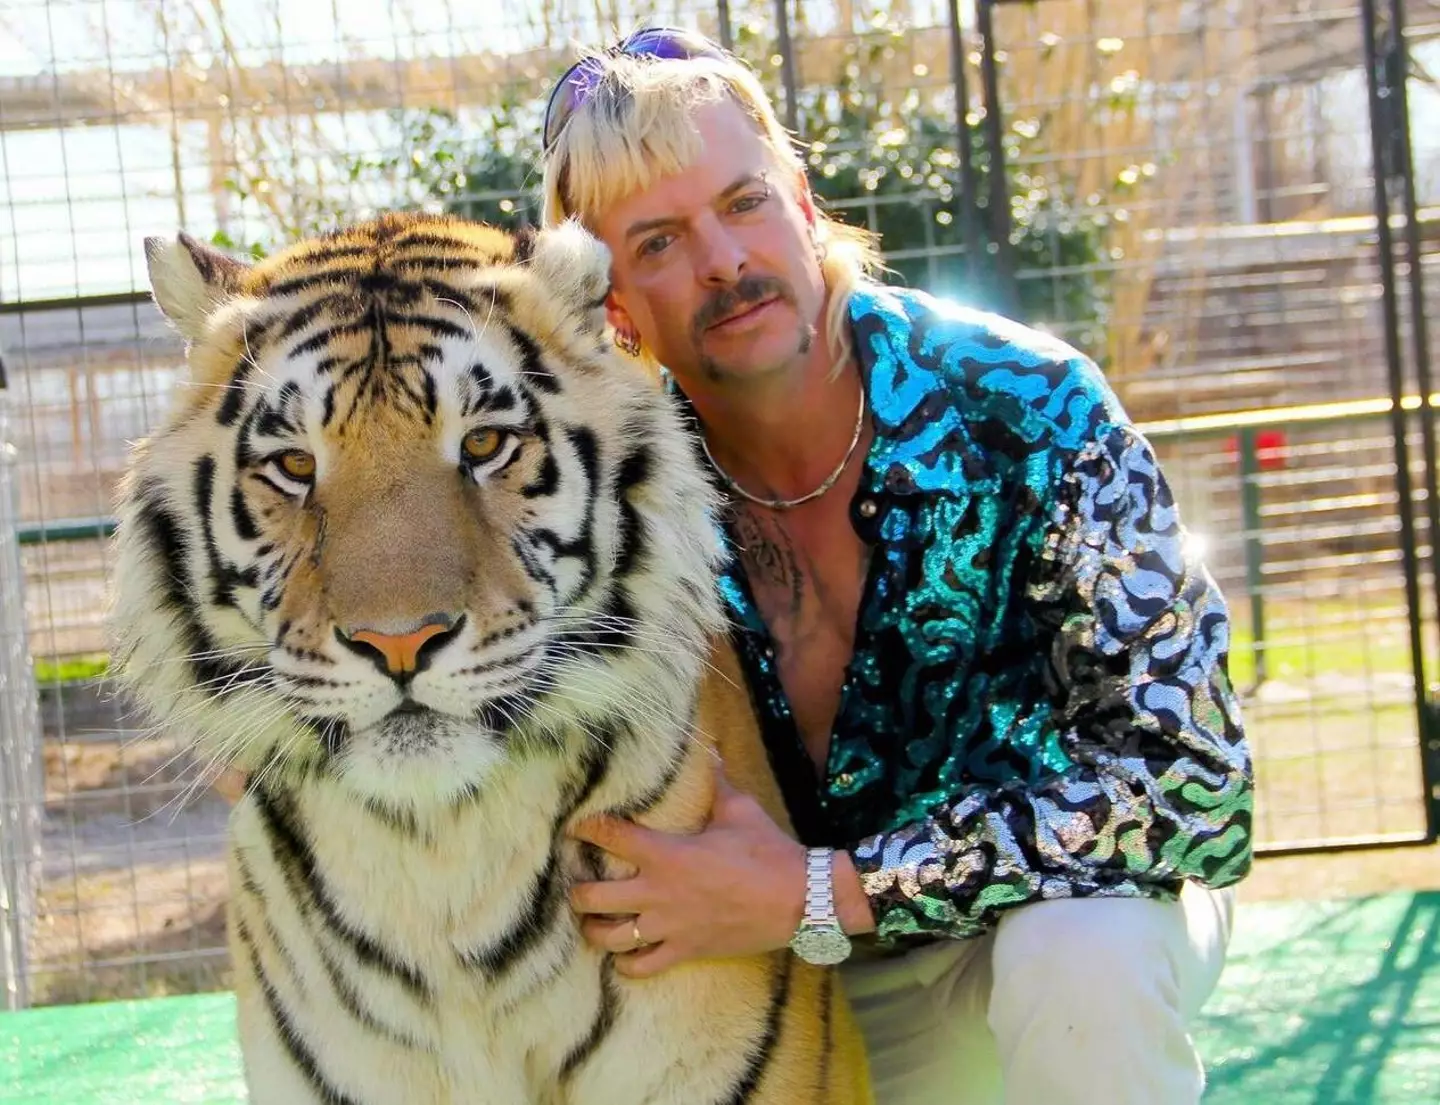 Joe Exotic, as seen on Netflix's The Tiger King.